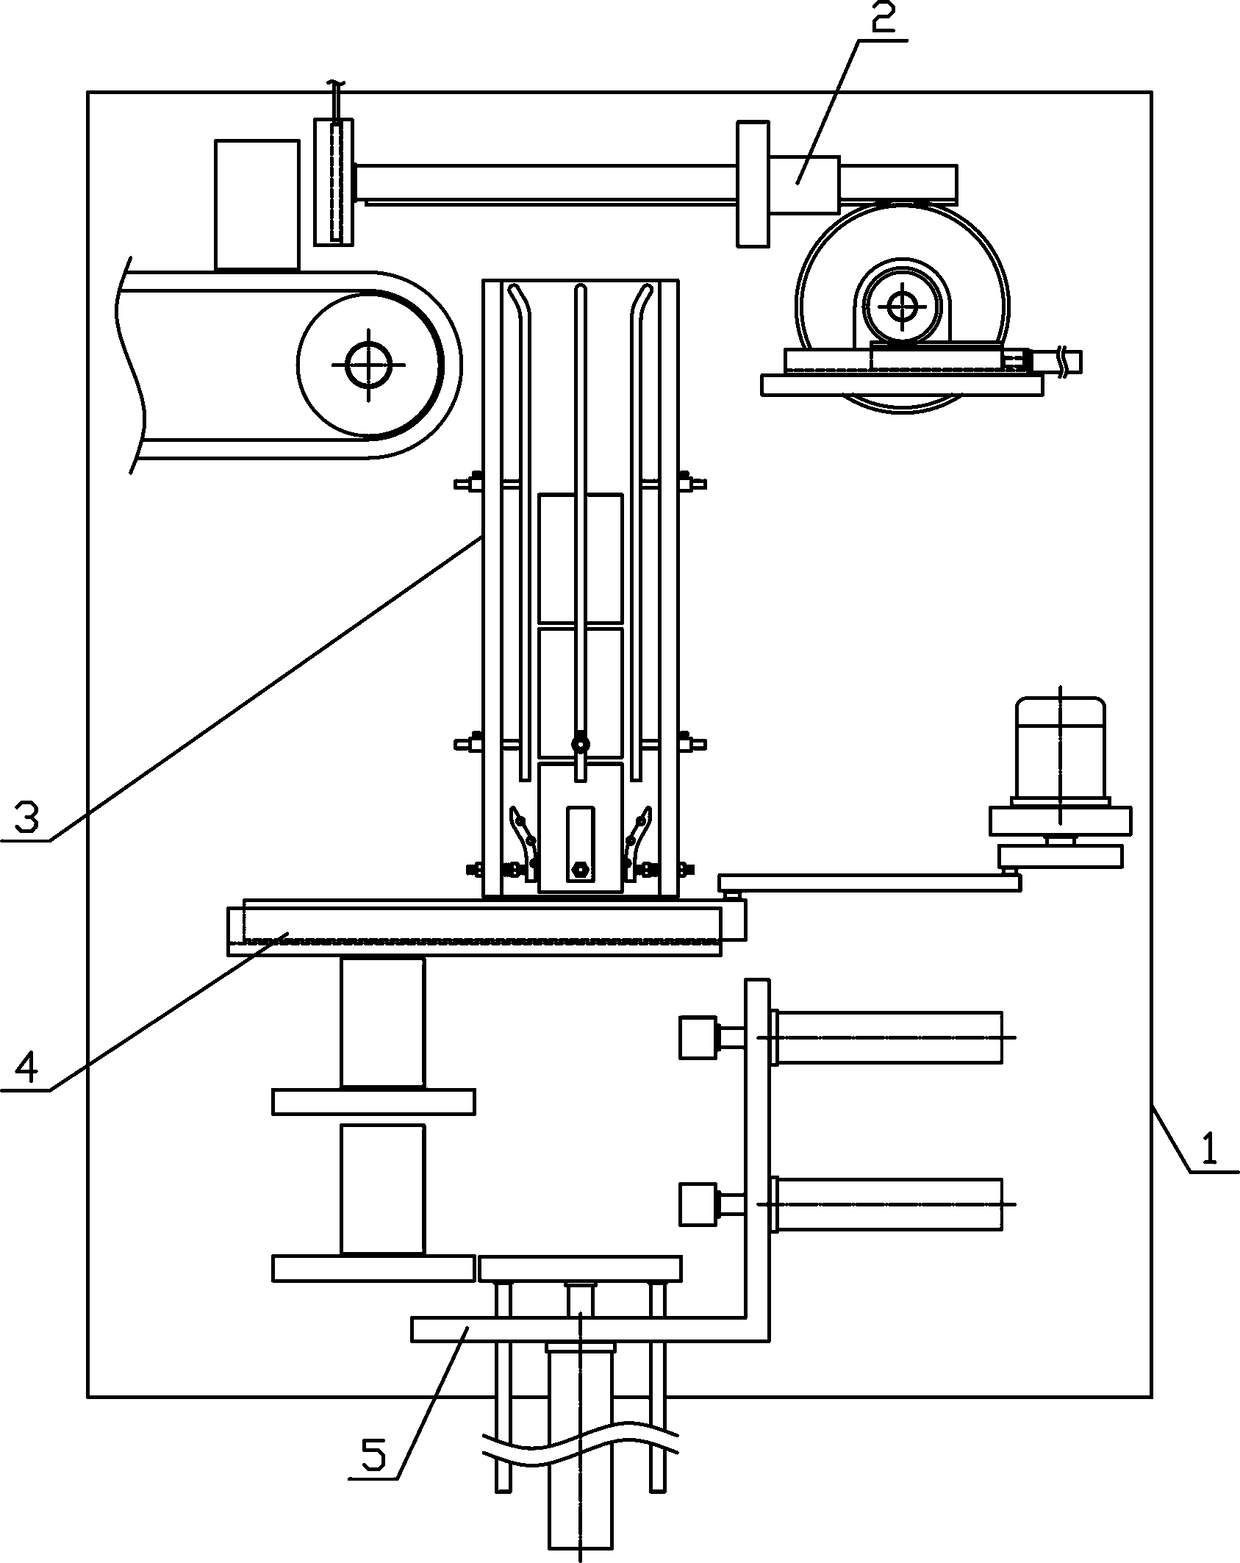 Continuous round can discharging and conveying mechanism